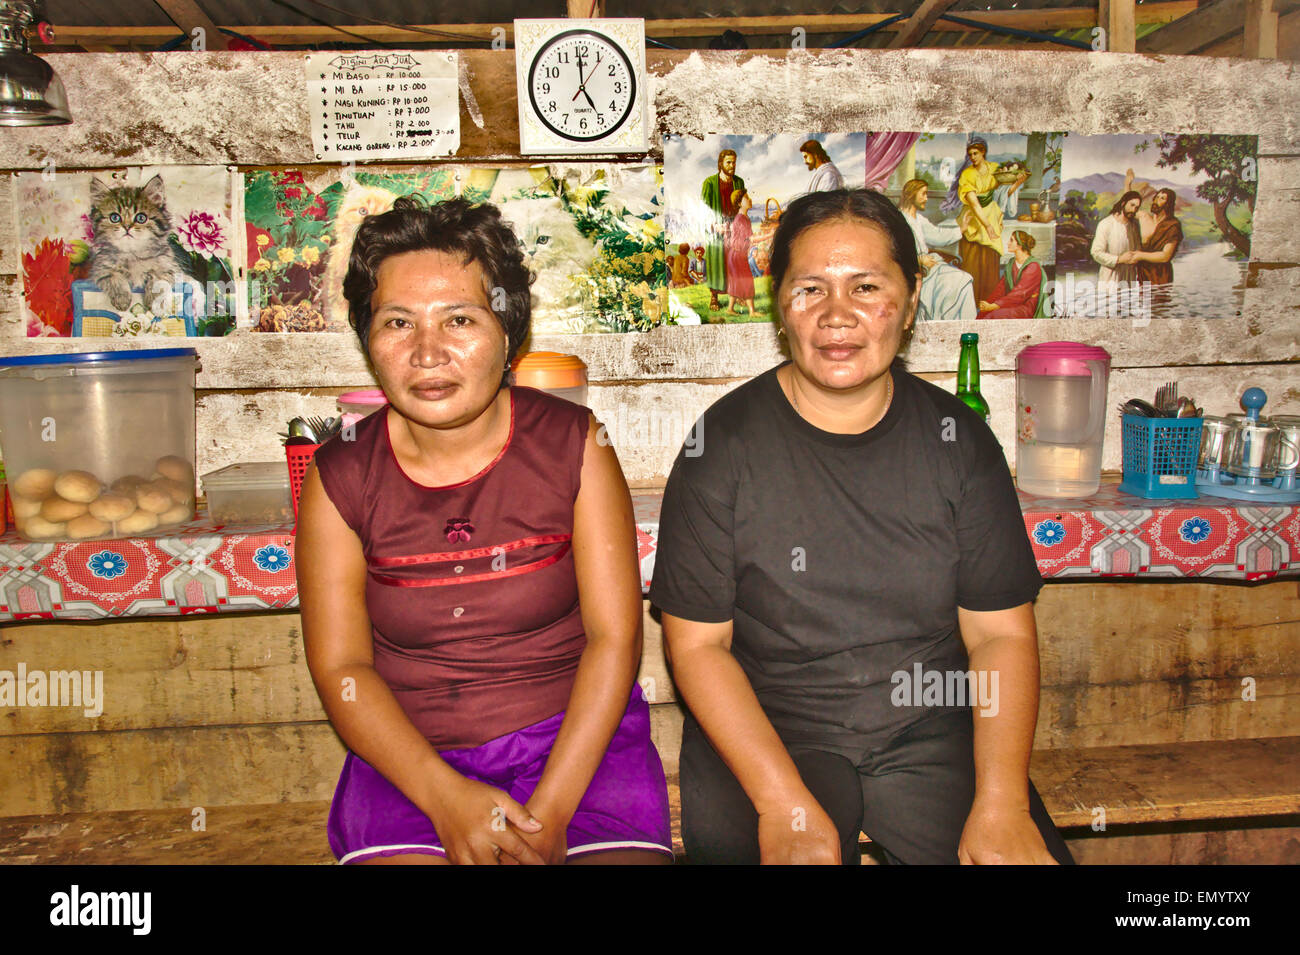 Two women sitting inside an unpainted, but attractive cafe on a country road on Tagulandang island north of Sulawesi, Indonesia Stock Photo